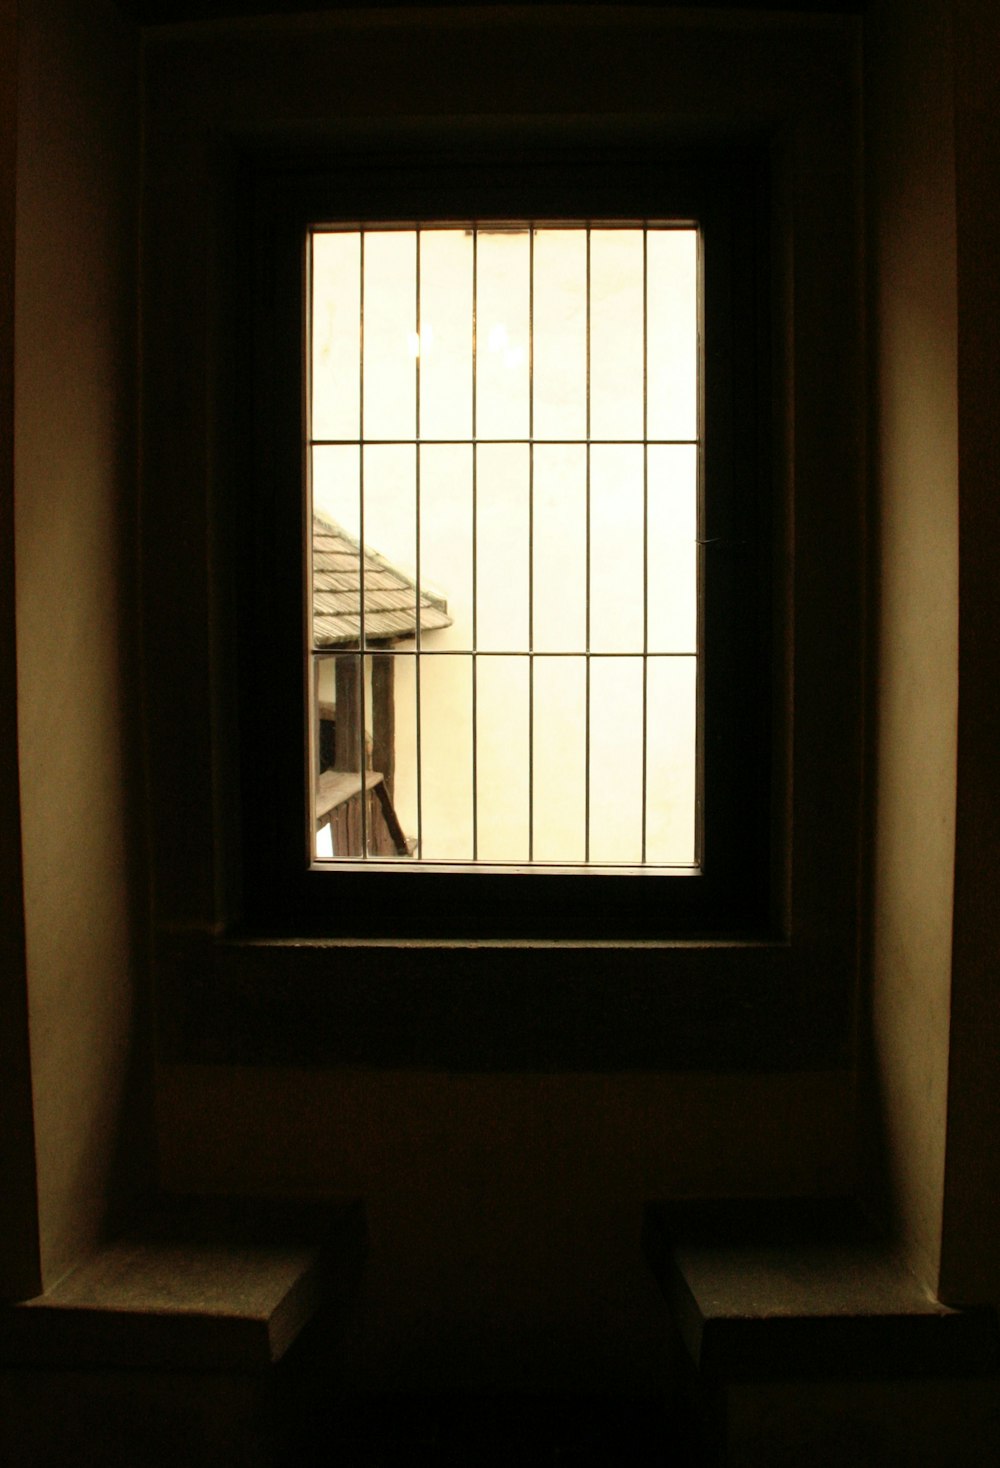 a window in a wall with a view of a house